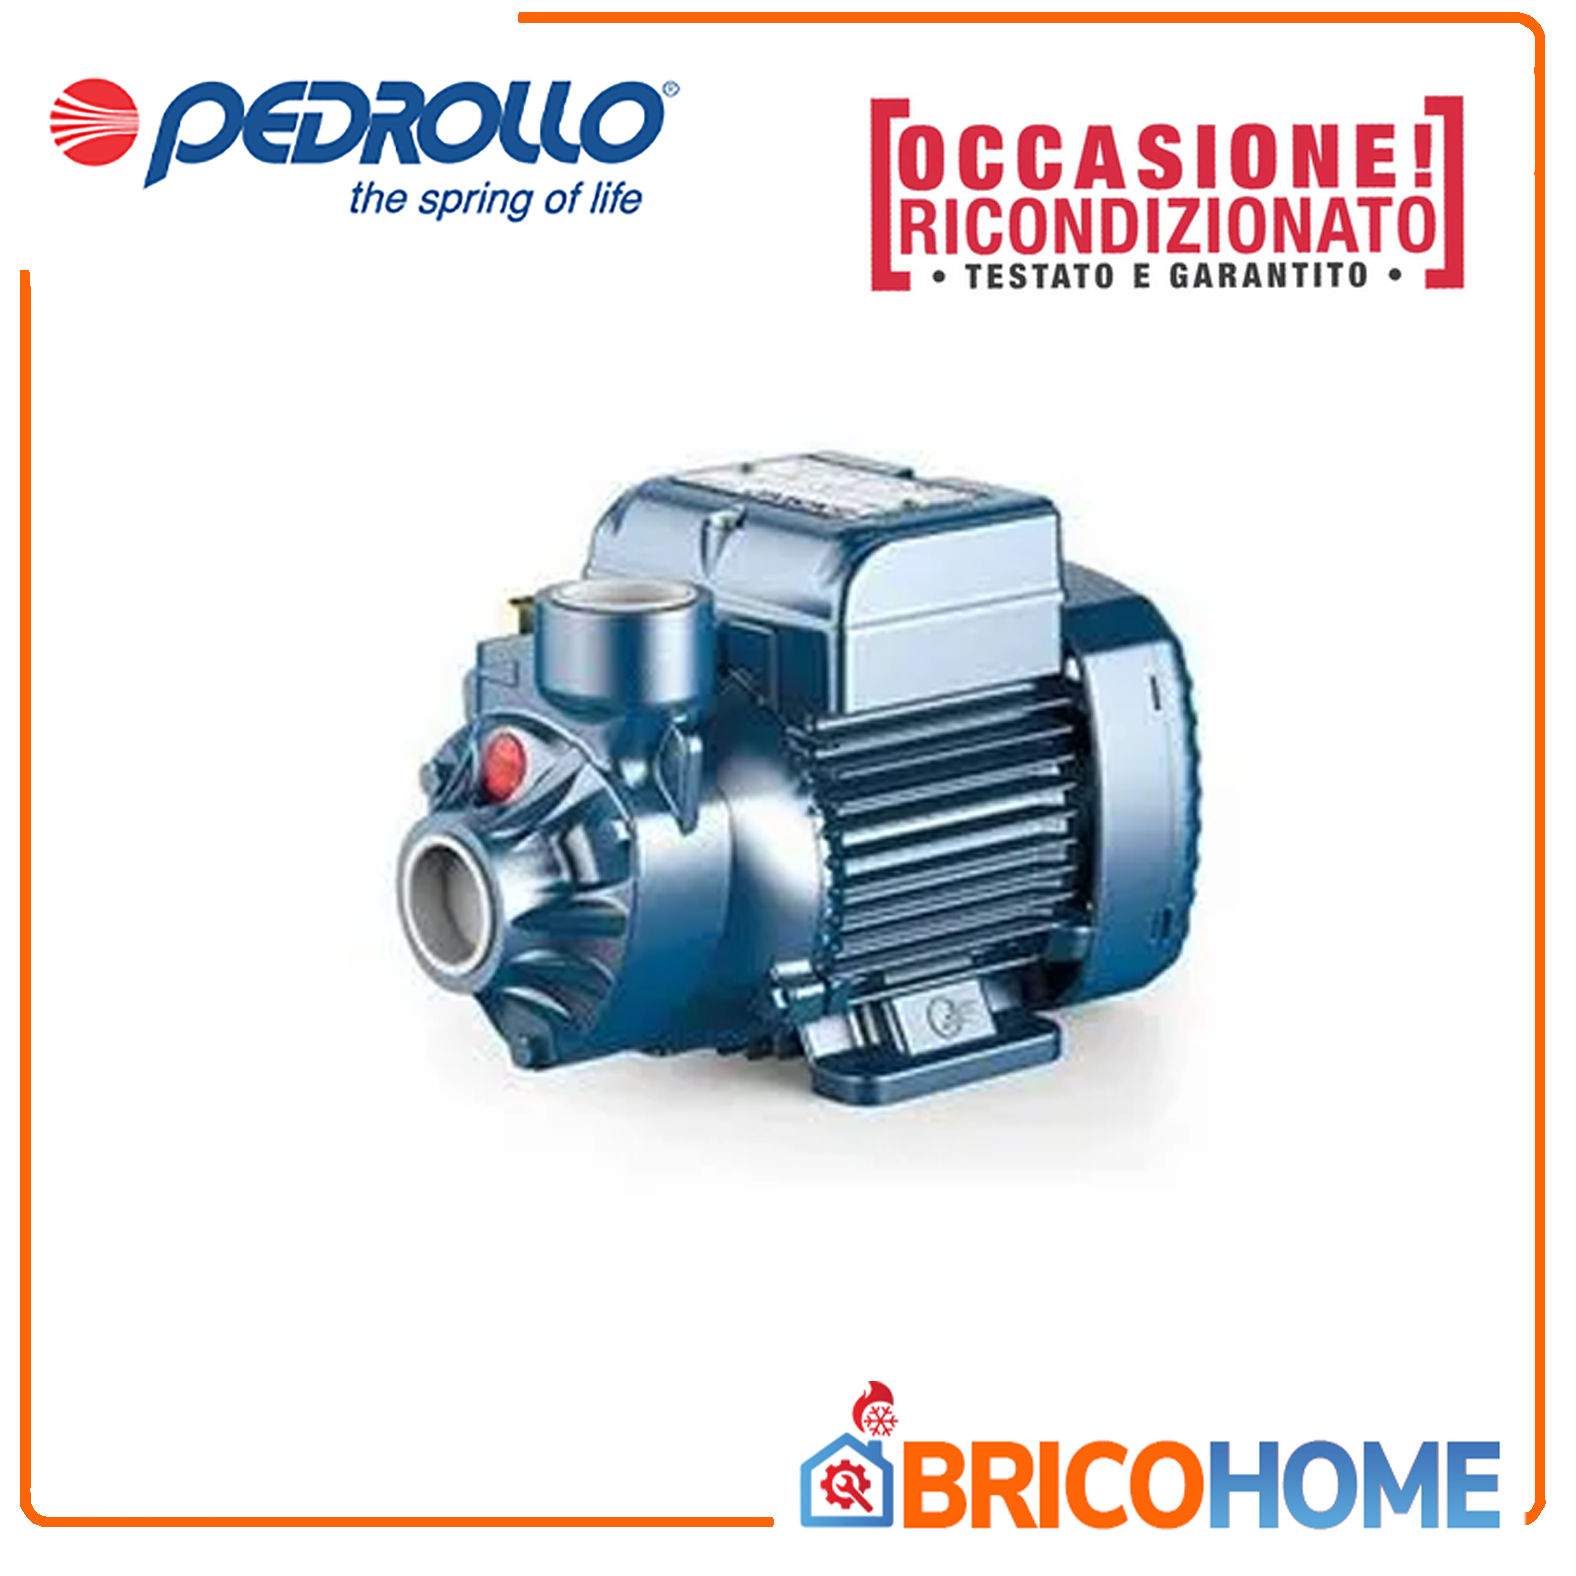 Pedrollo PKm 60 HP 0.50 electric pump with single-phase peripheral impeller - REFURBISHED